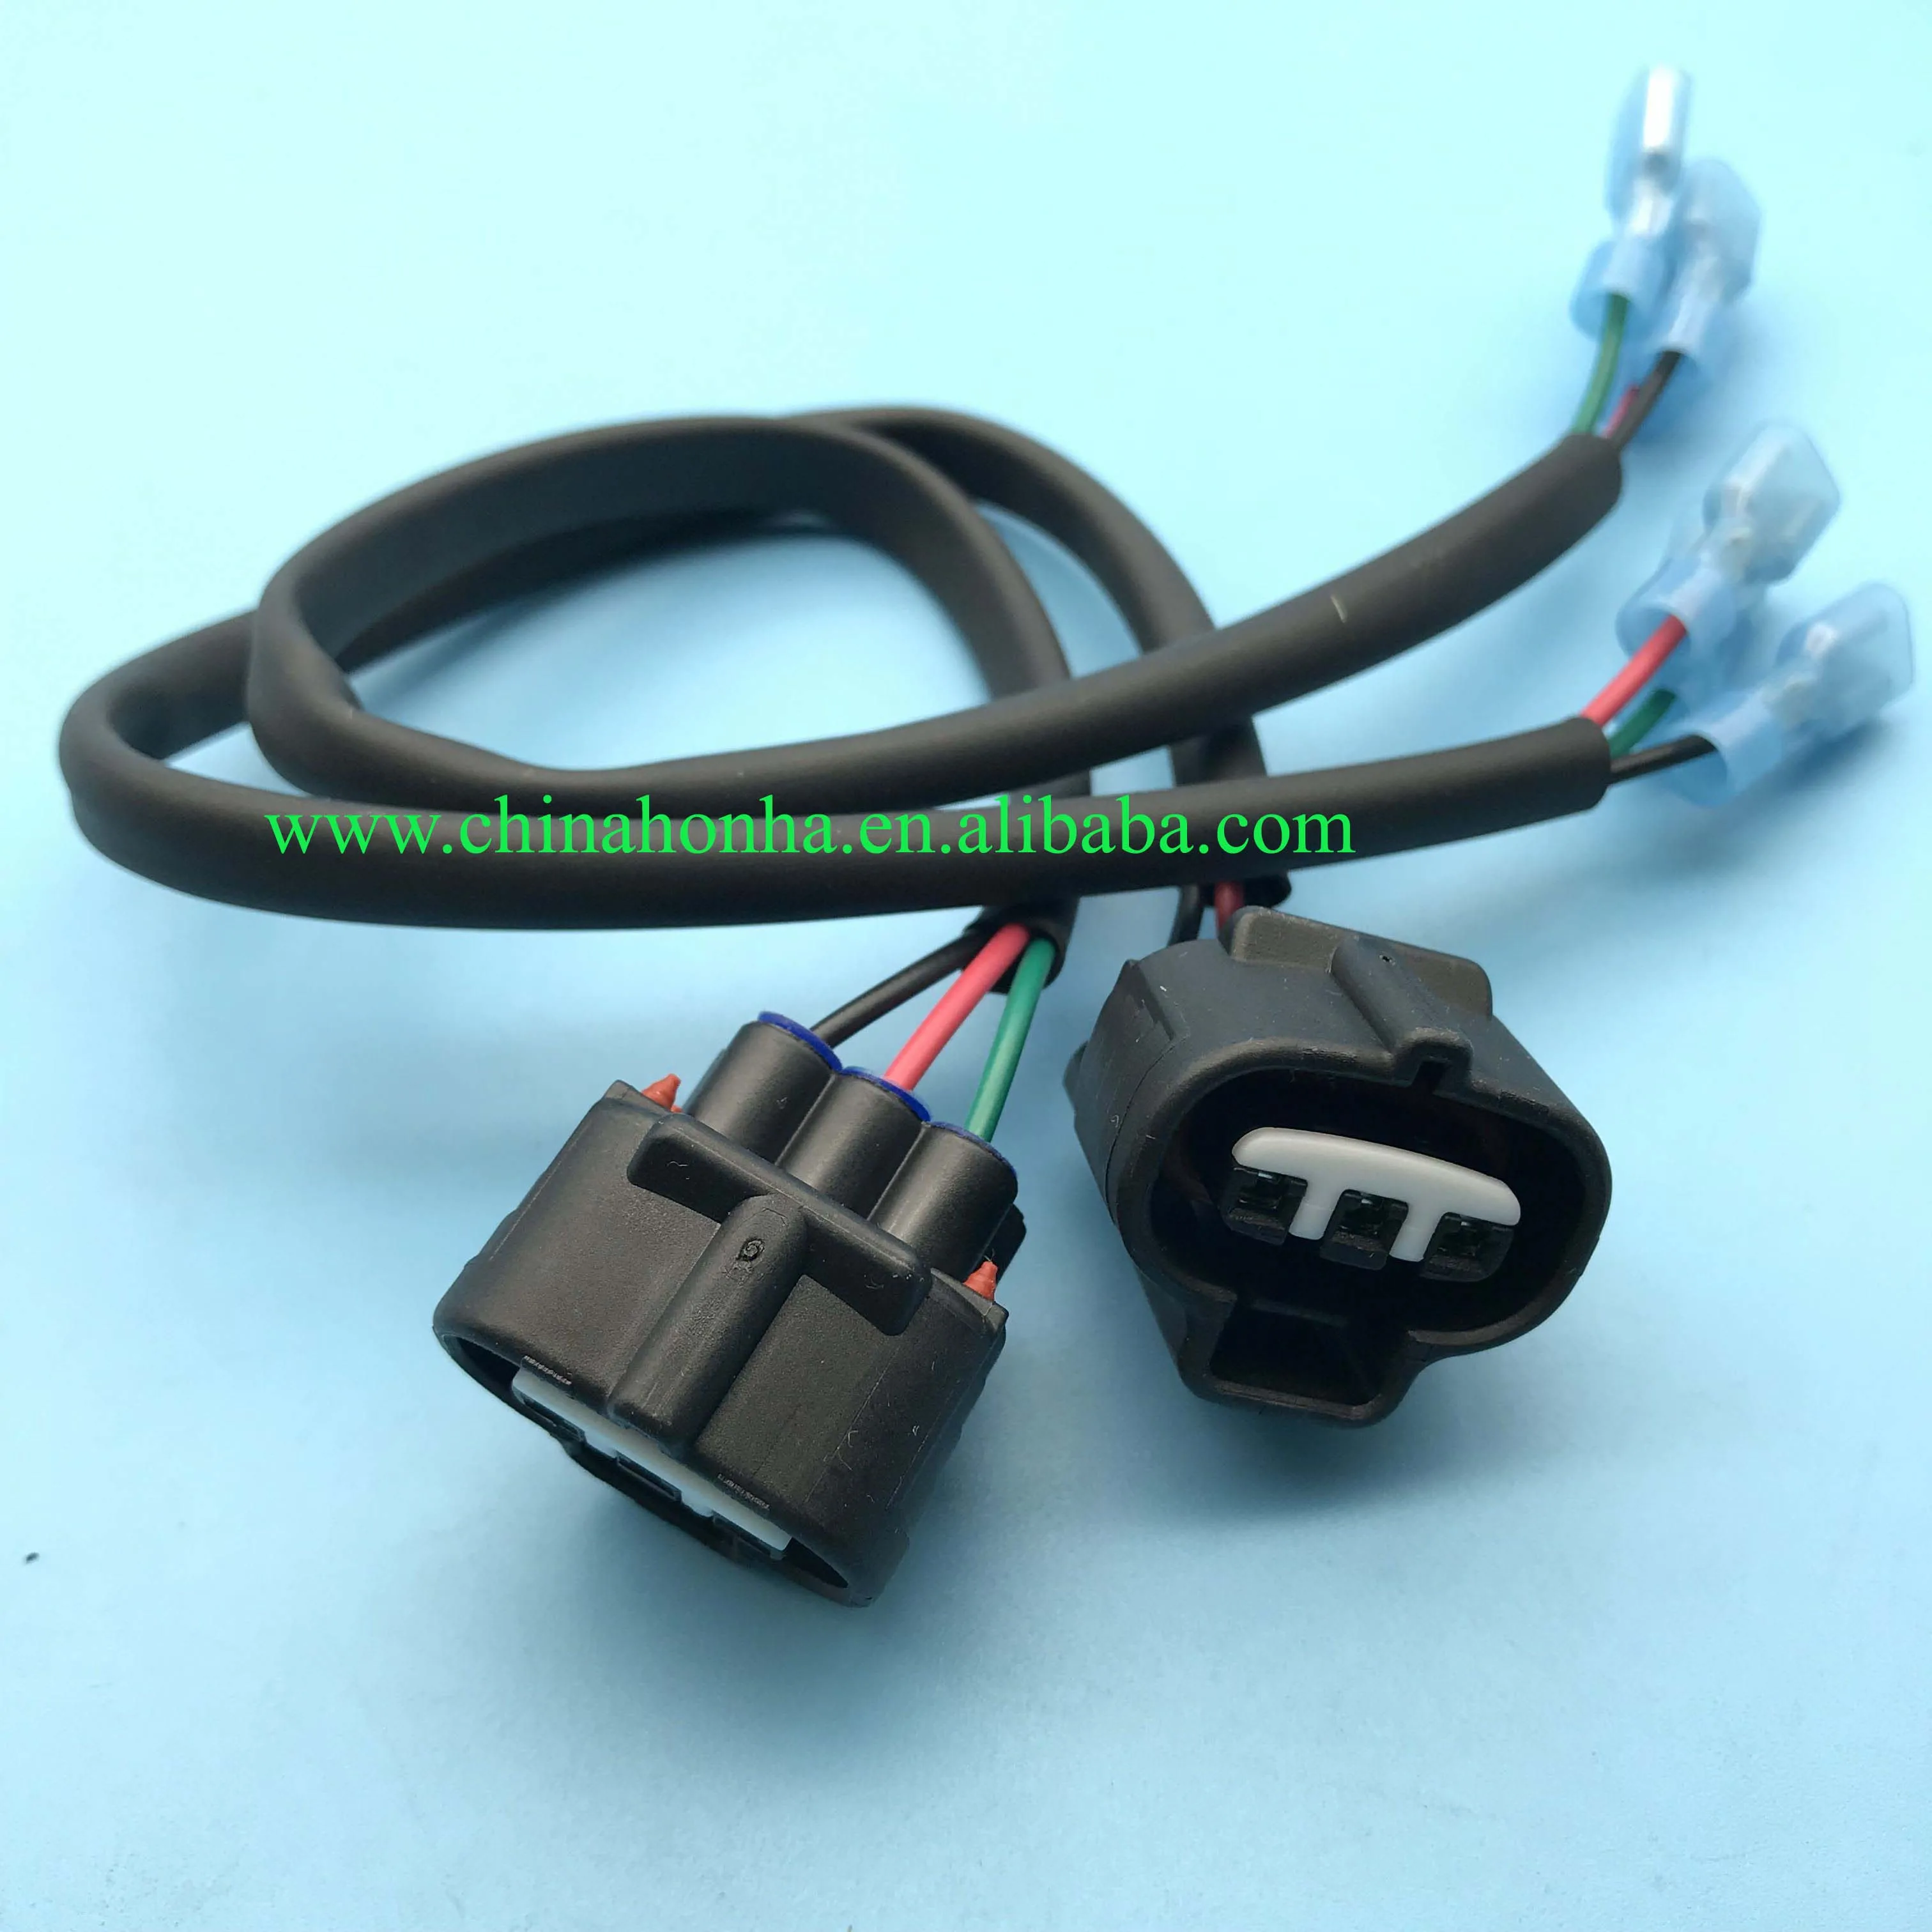 

6189-0099 90980-10841 3 Pin female Auto Connector VSS 1JZ 2JZ Map Sensor with 30cm 18AWG wire harness